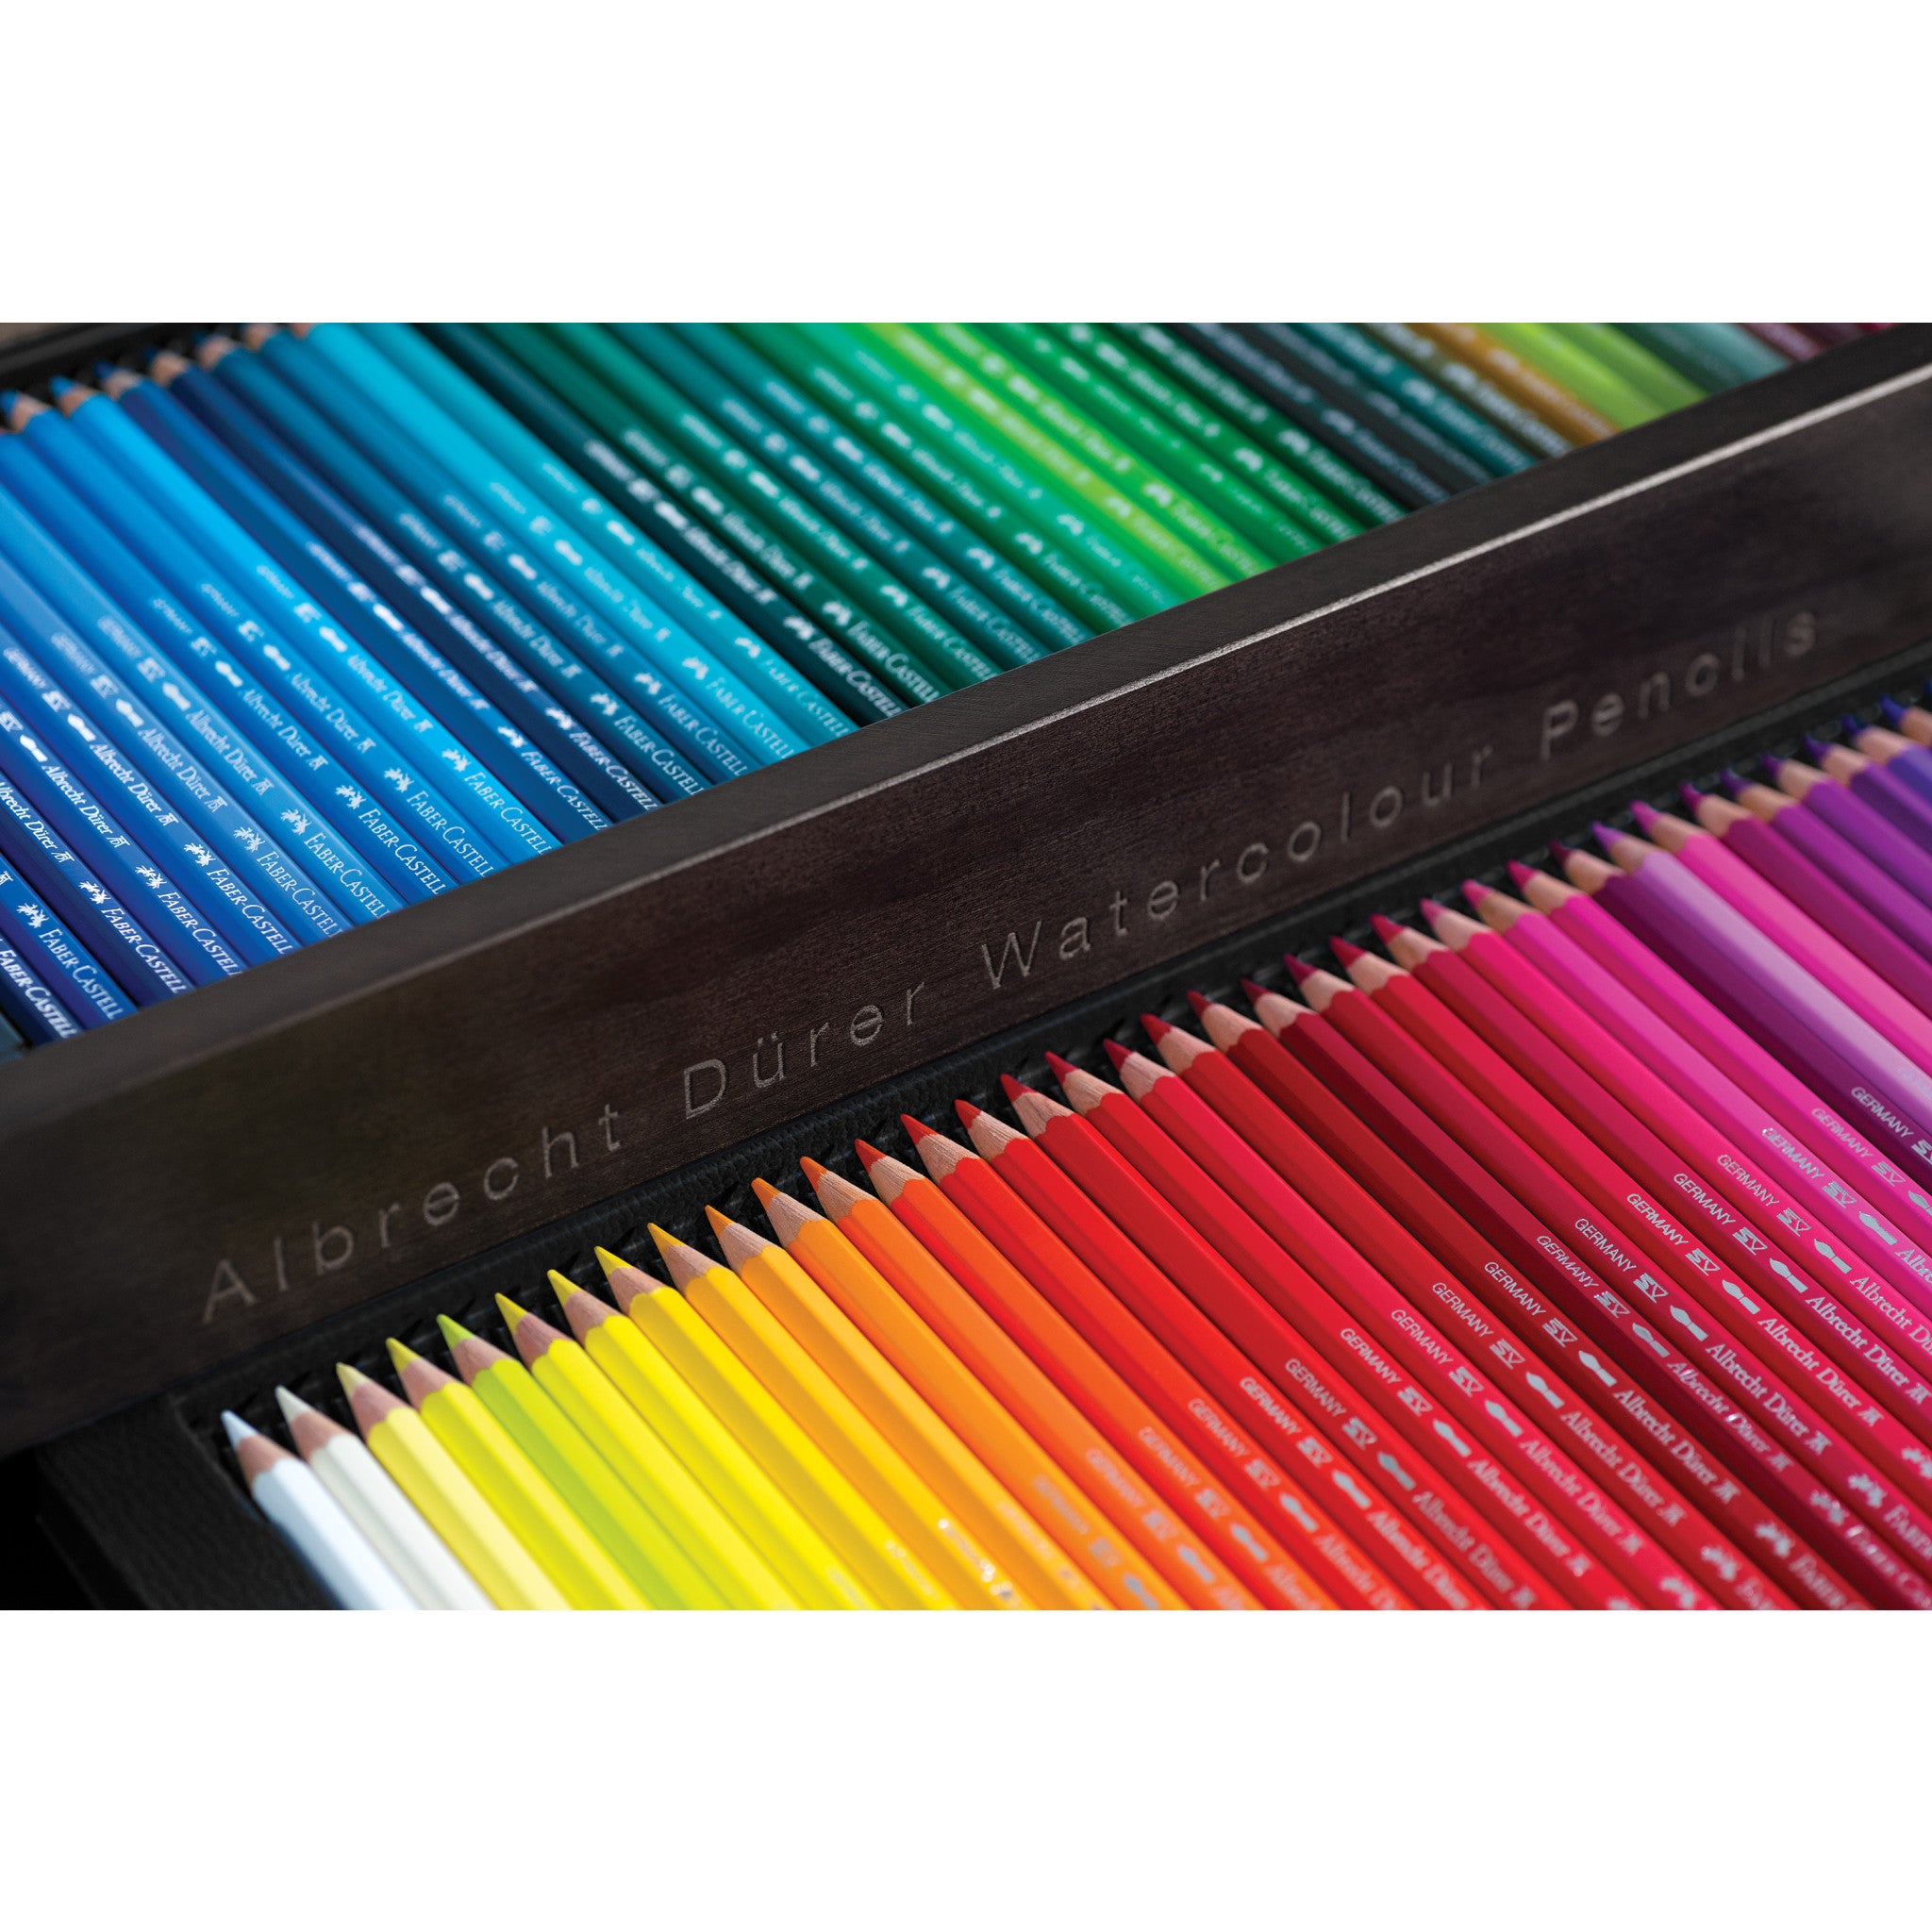 Faber-Castell Art & Graphic Limited Edition Set